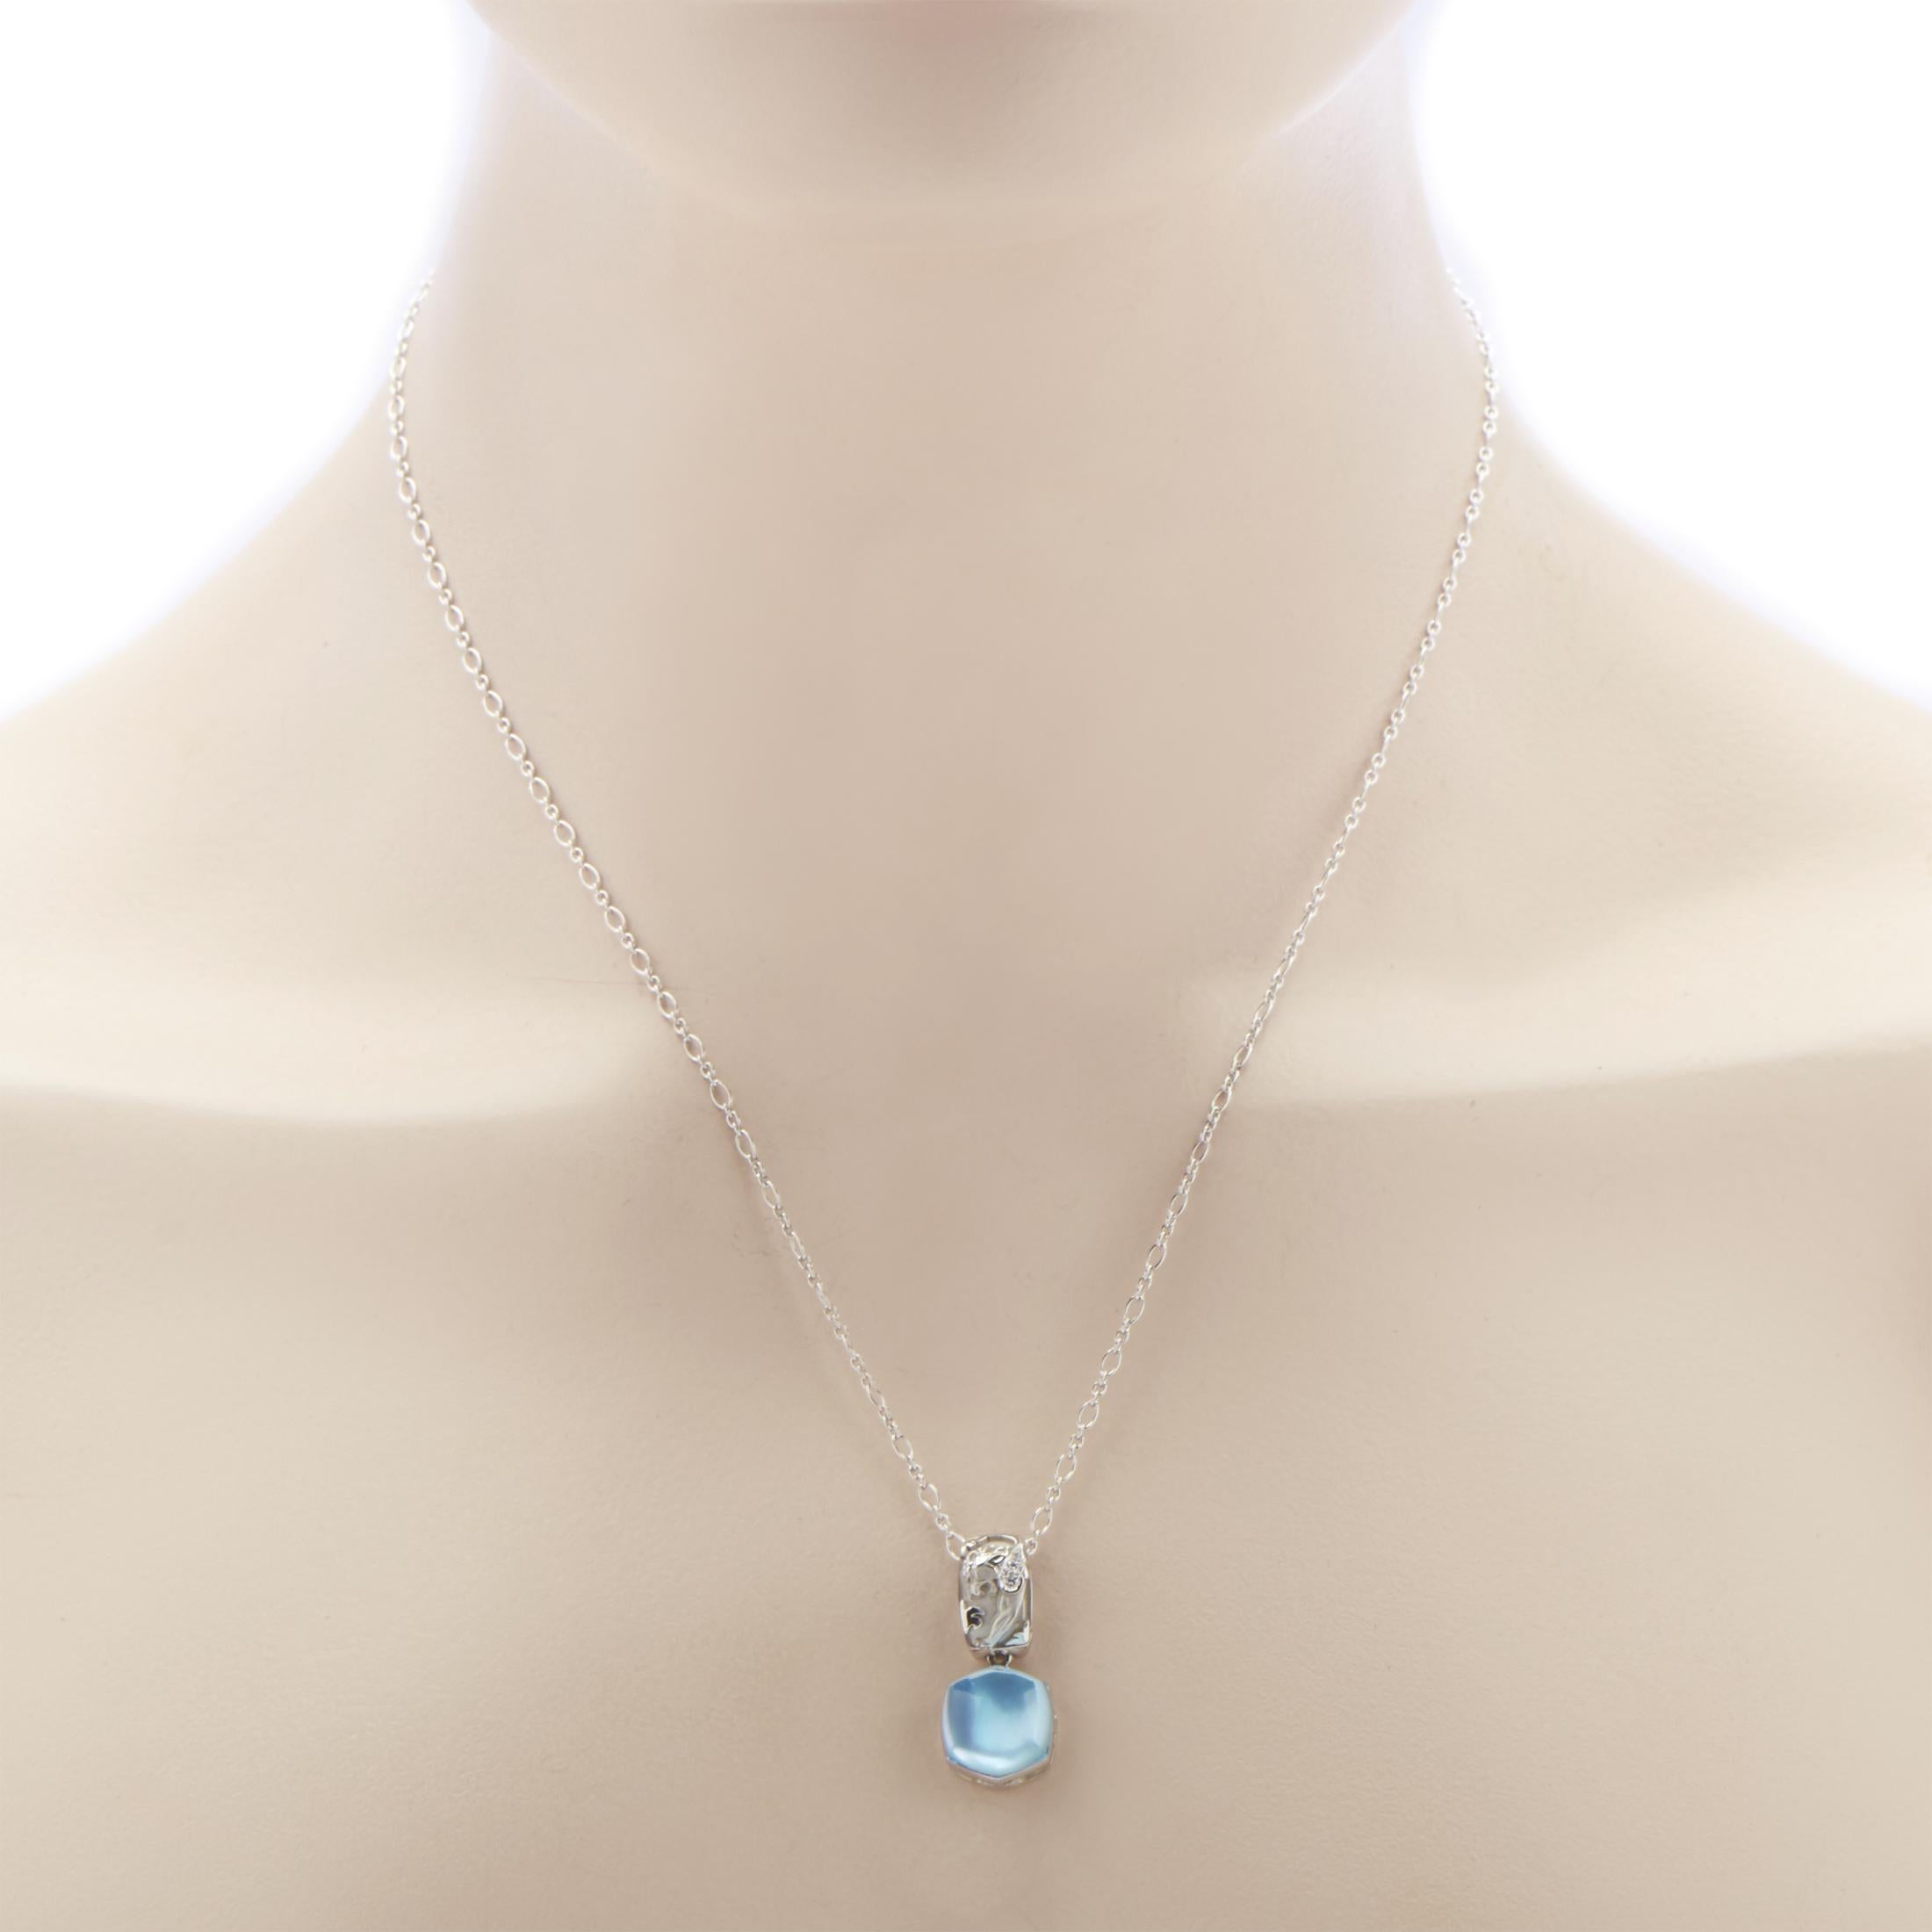 Boasting a pleasantly toned and smoothly shaped topaz stone weighing 8.95 carats upon mother of pearl that tastefully complements the bright blend of prestigious 18K white gold and lustrous diamonds totaling 0.09ct, this charming necklace from